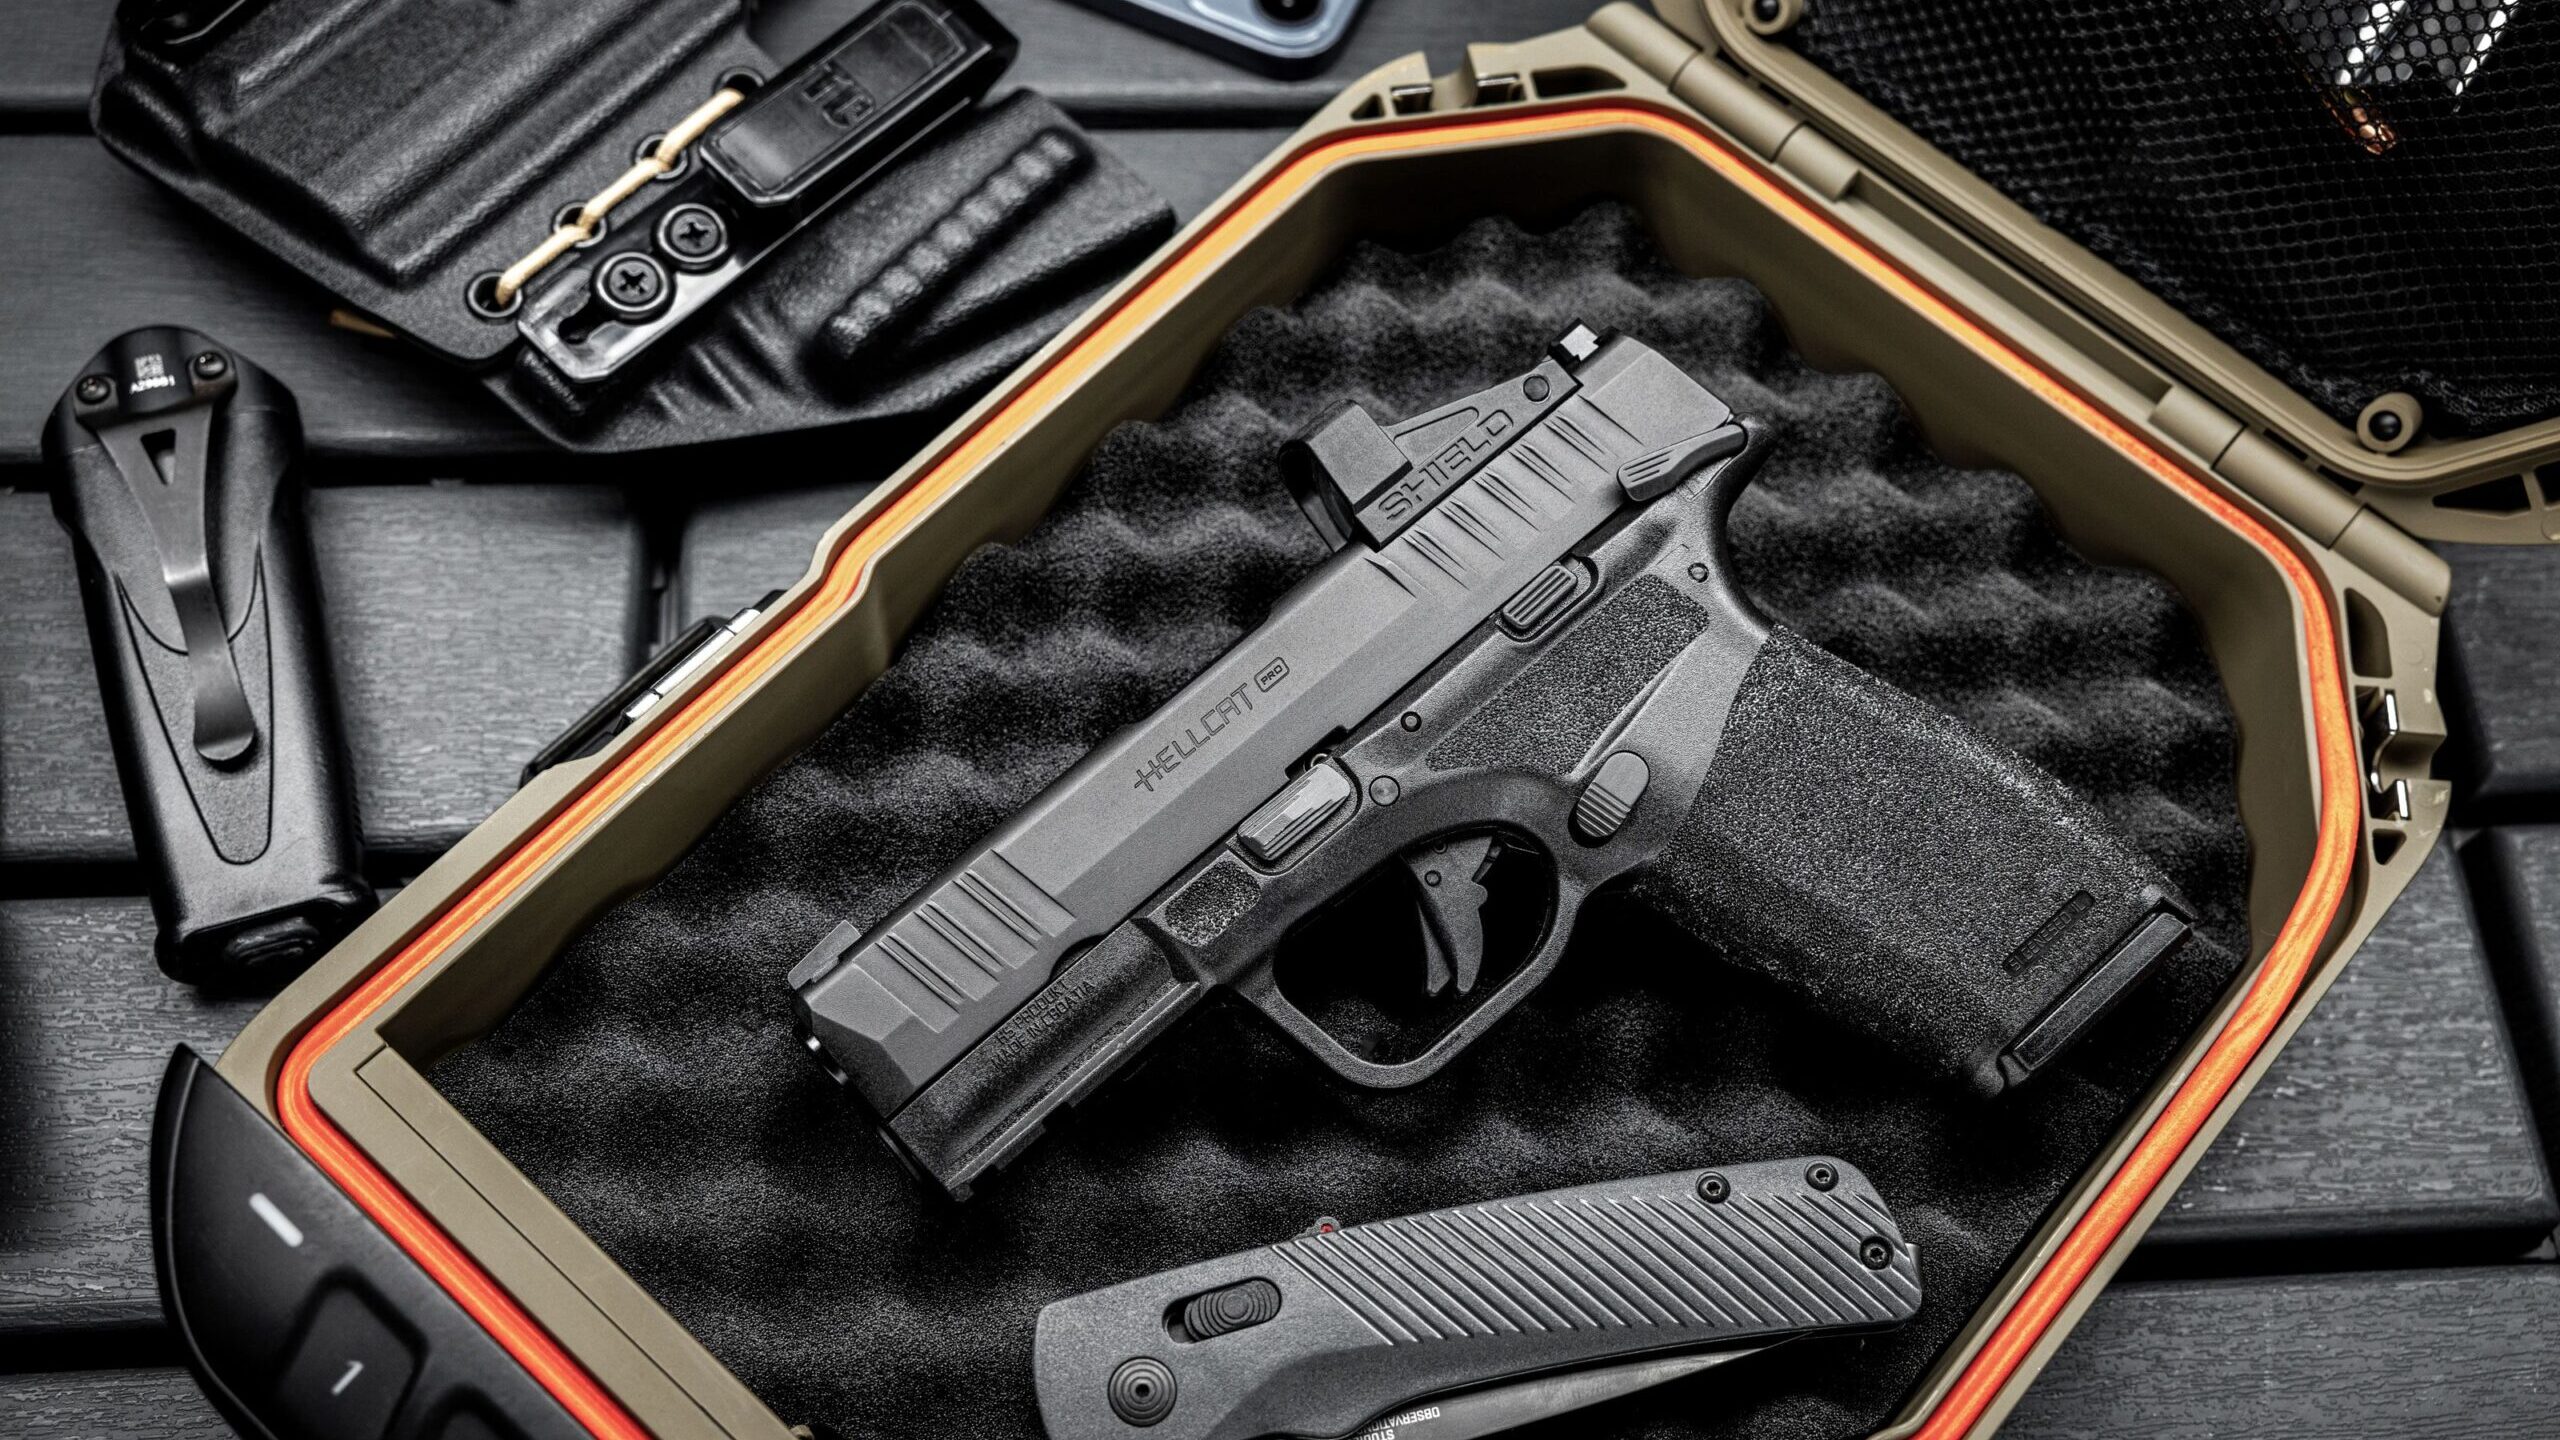 Introducing the New Manual Safety Springfield Hellcat Pro 9mm Pistol